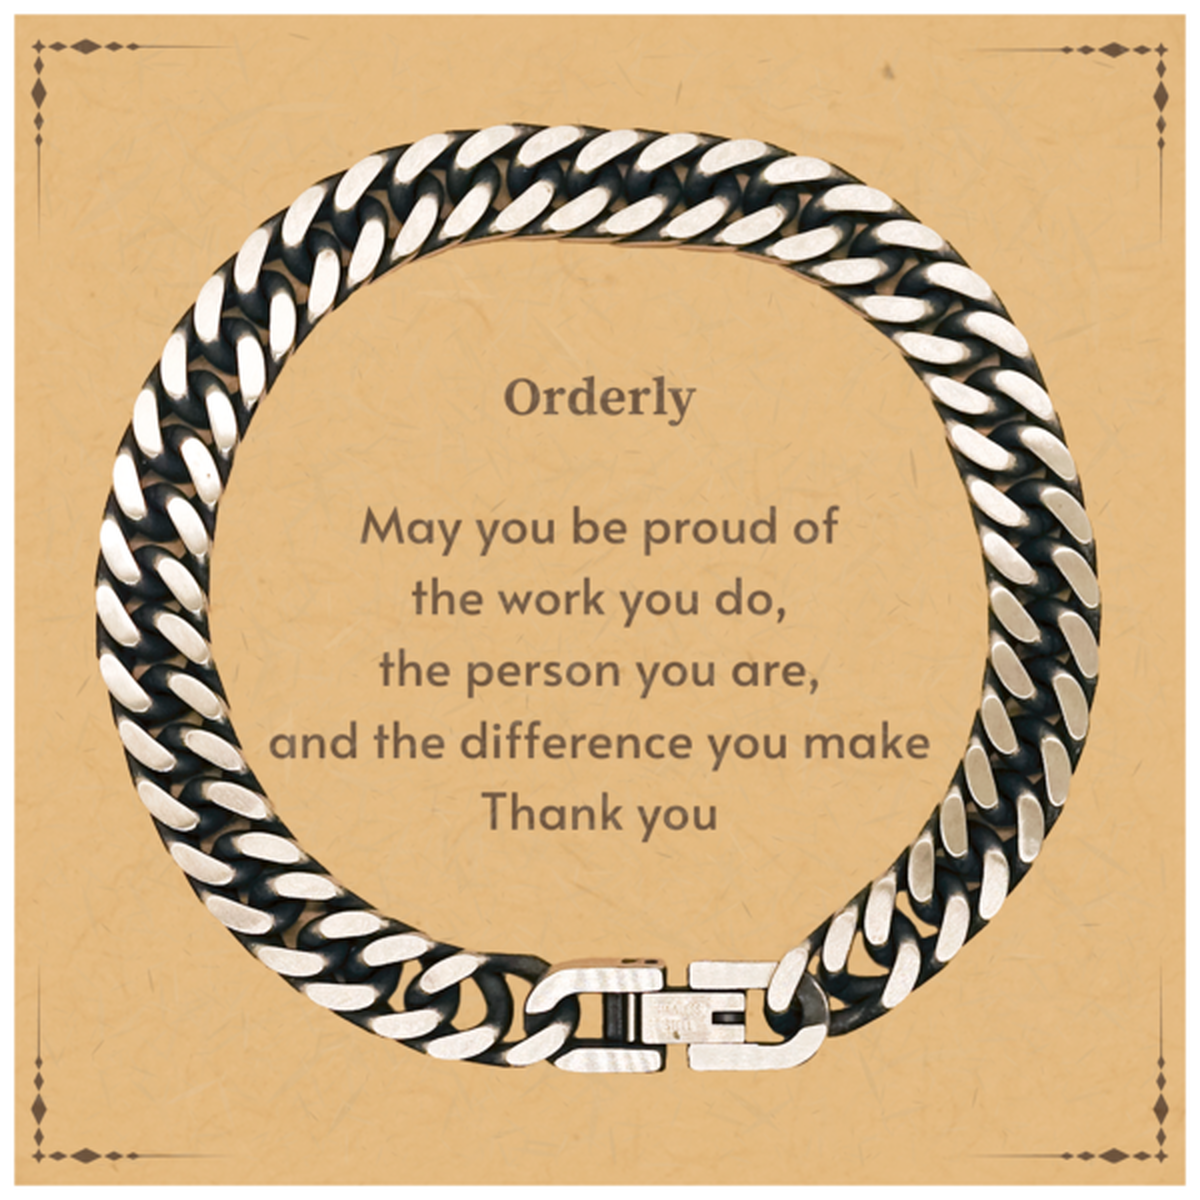 Heartwarming Cuban Link Chain Bracelet Retirement Coworkers Gifts for Orderly, Orderly May You be proud of the work you do, the person you are Gifts for Boss Men Women Friends